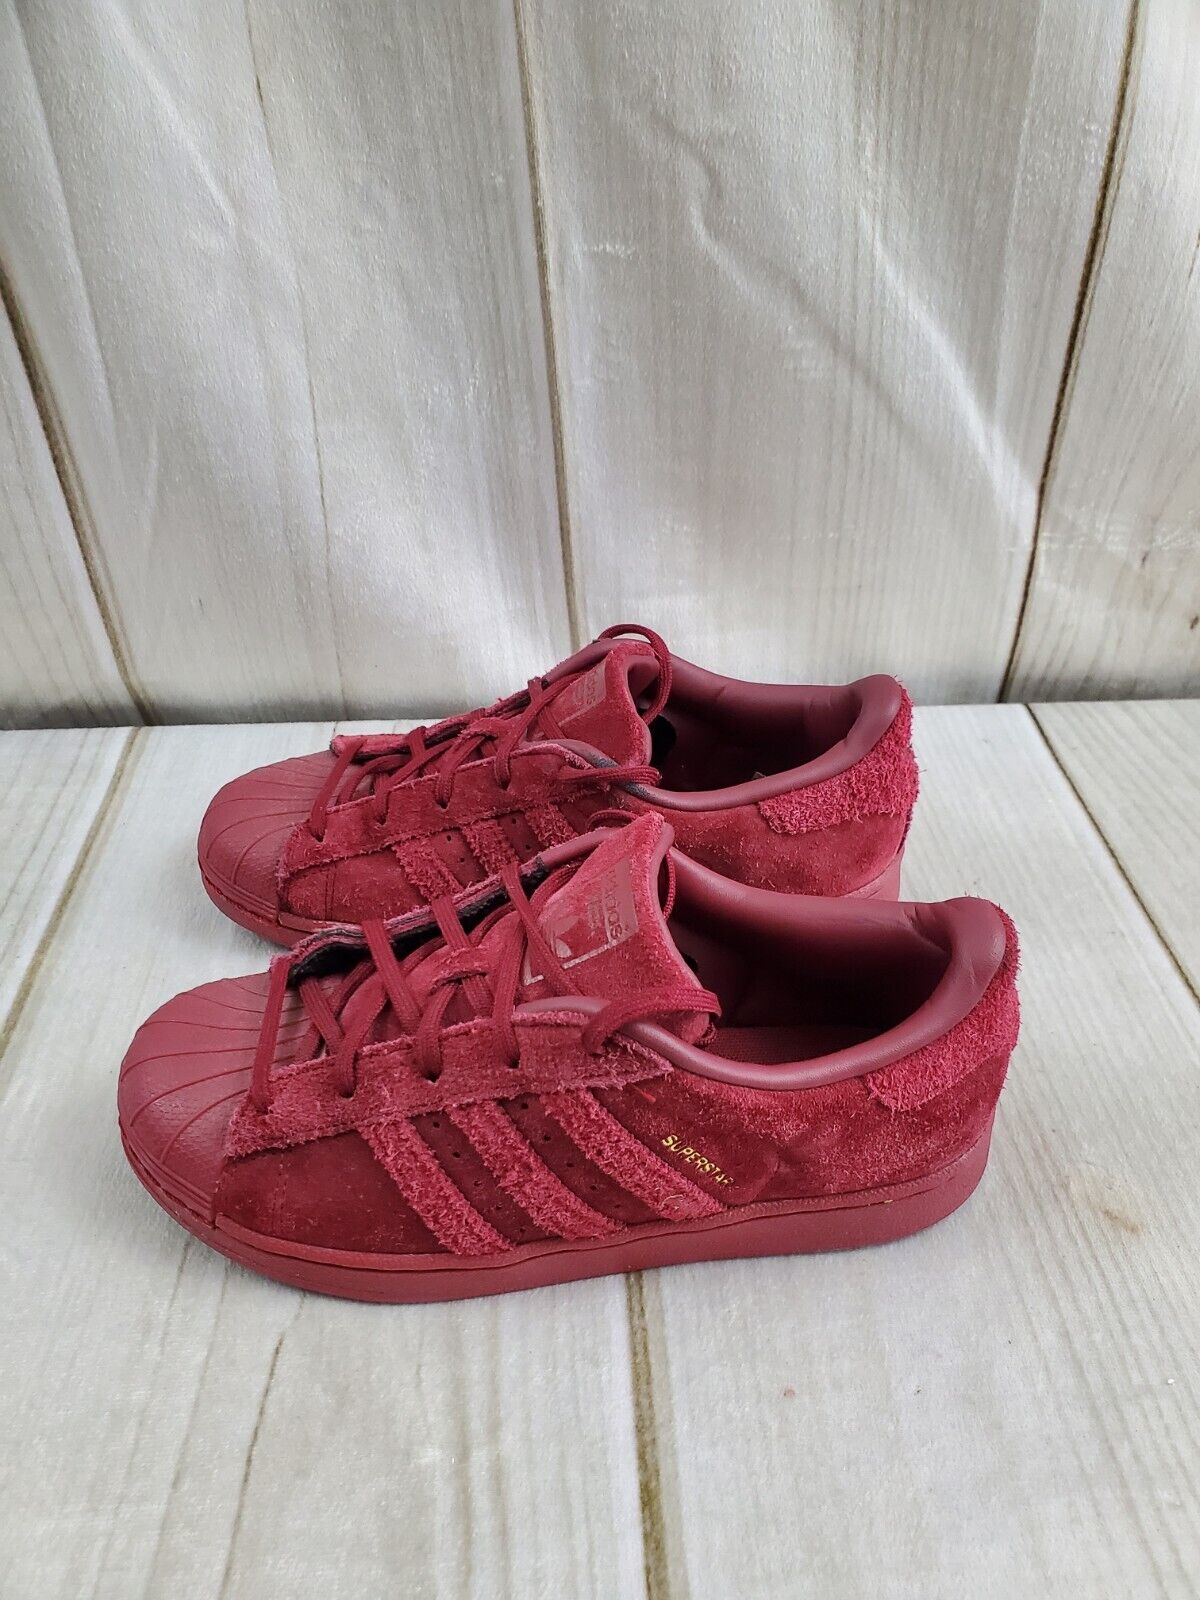 ADIDAS YOUTH ORIGINALS SUPERSTAR SUEDE SNEAKER SIZE 3 BURGUNDY LACE UP